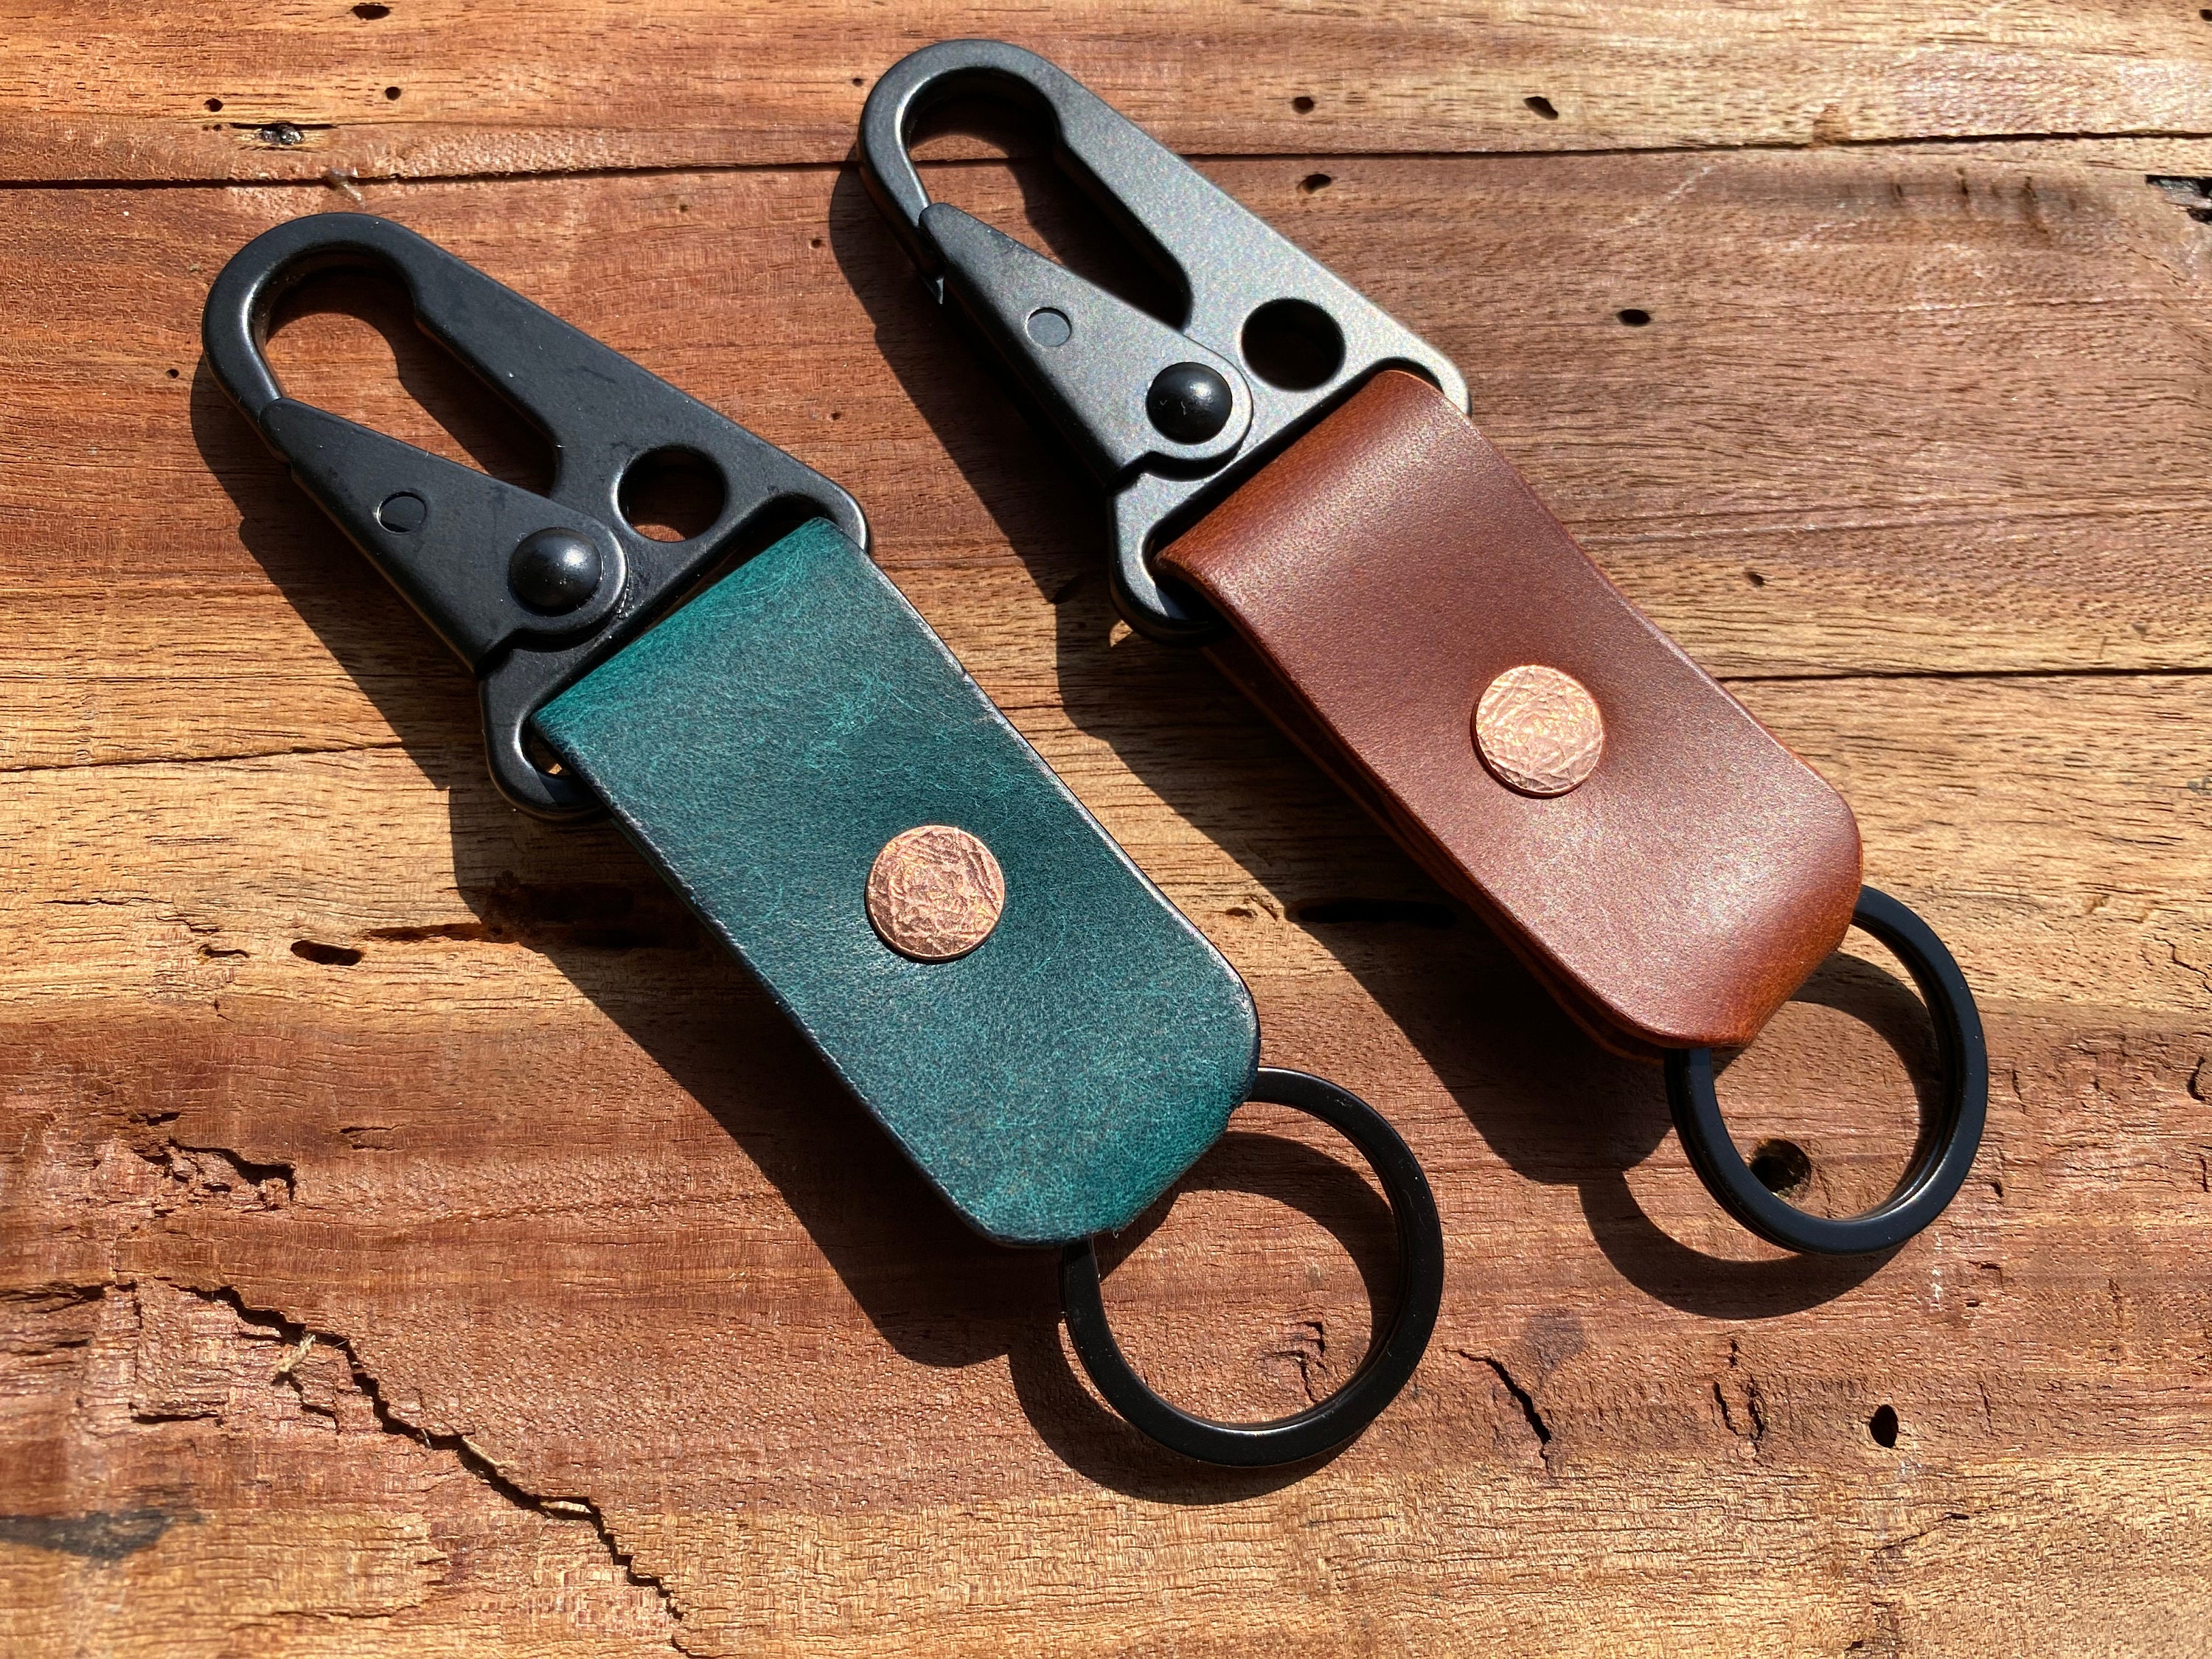 EDC Leather Key Fob With Snap Leather Key Strap and Metal Tactical